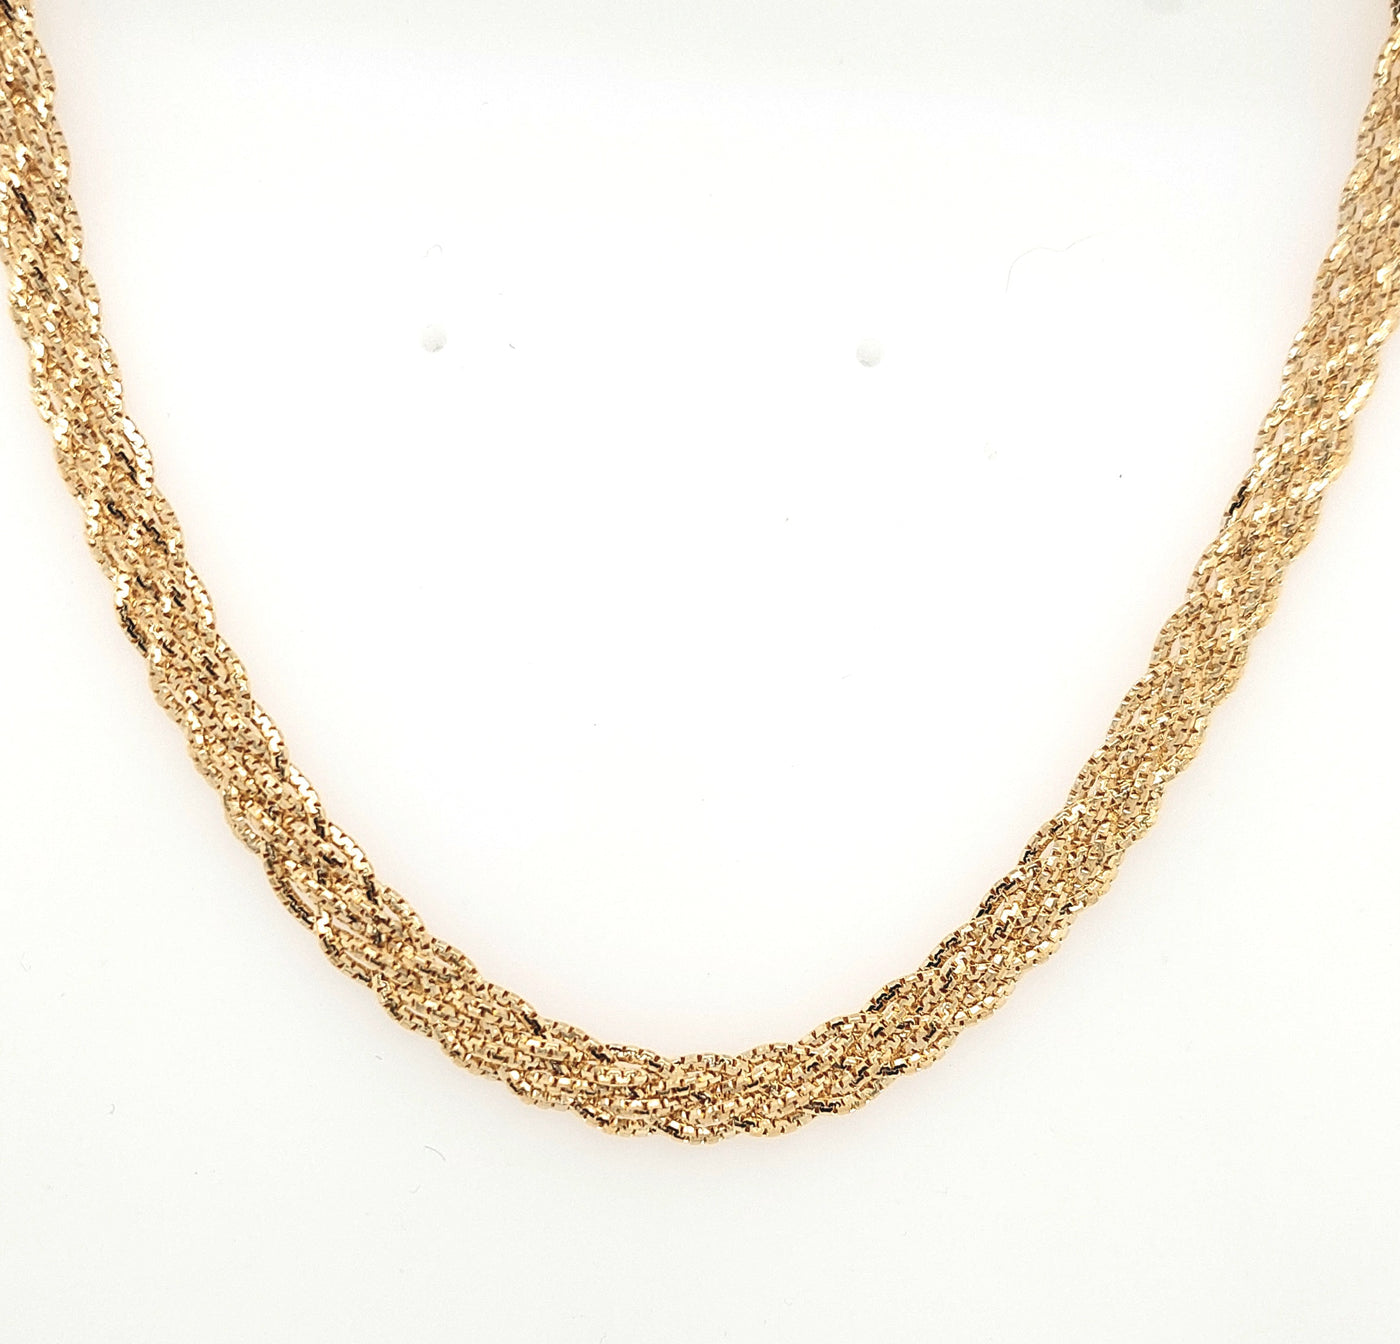 14KY Stunning Interwoven Necklace 5mm Length:18.5in